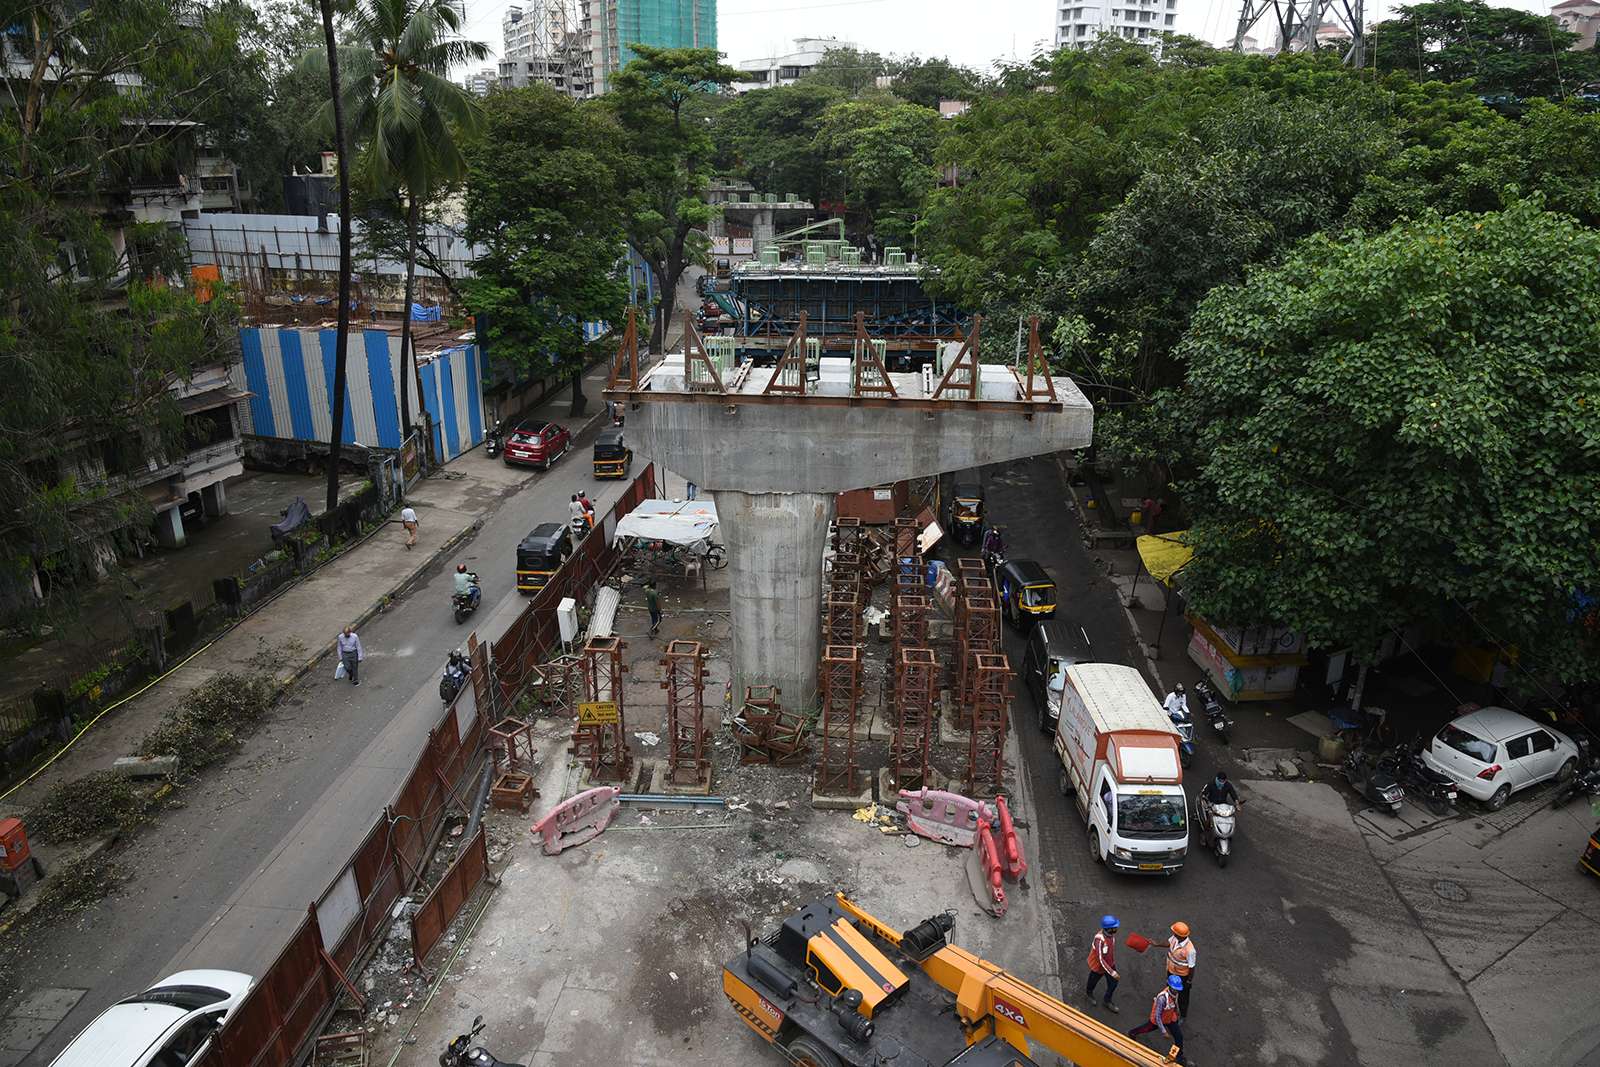 Mumbai Metro: close-up of construction site in the middle of traffic 